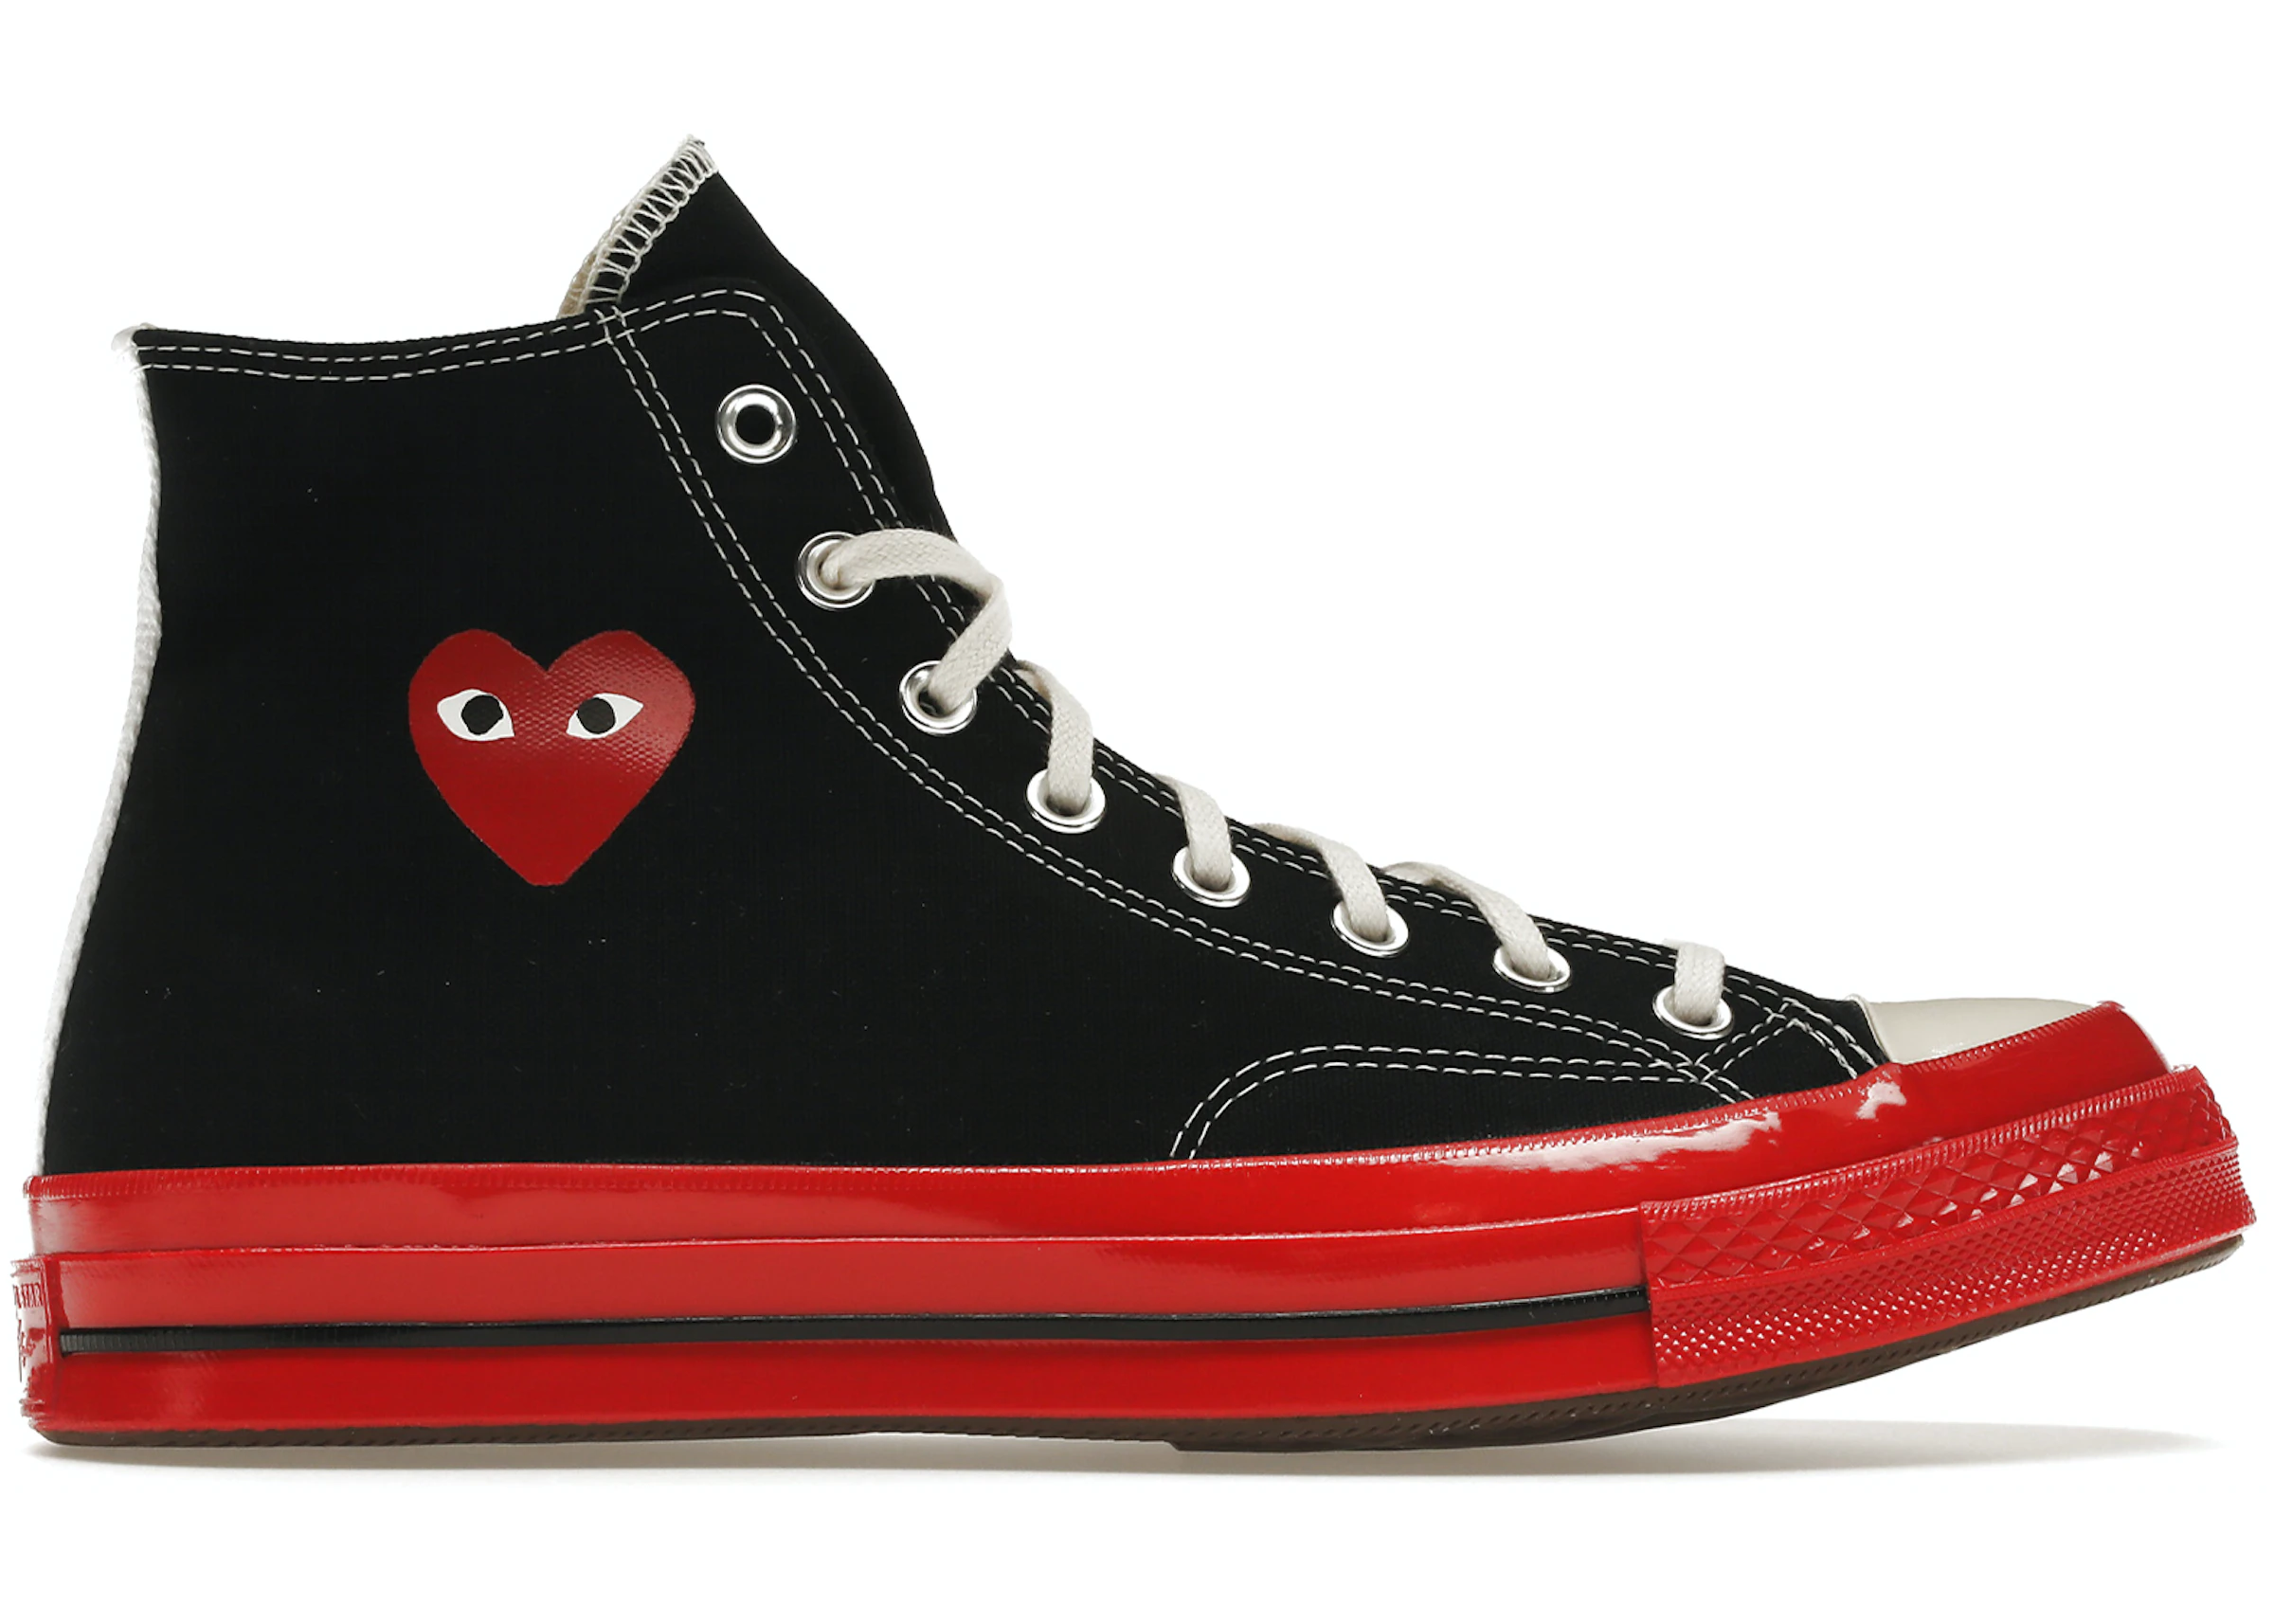 Converse Chuck Taylor All-Star 70 Hi Comme des Garcons PLAY Black Red  Midsole - A01793C - US